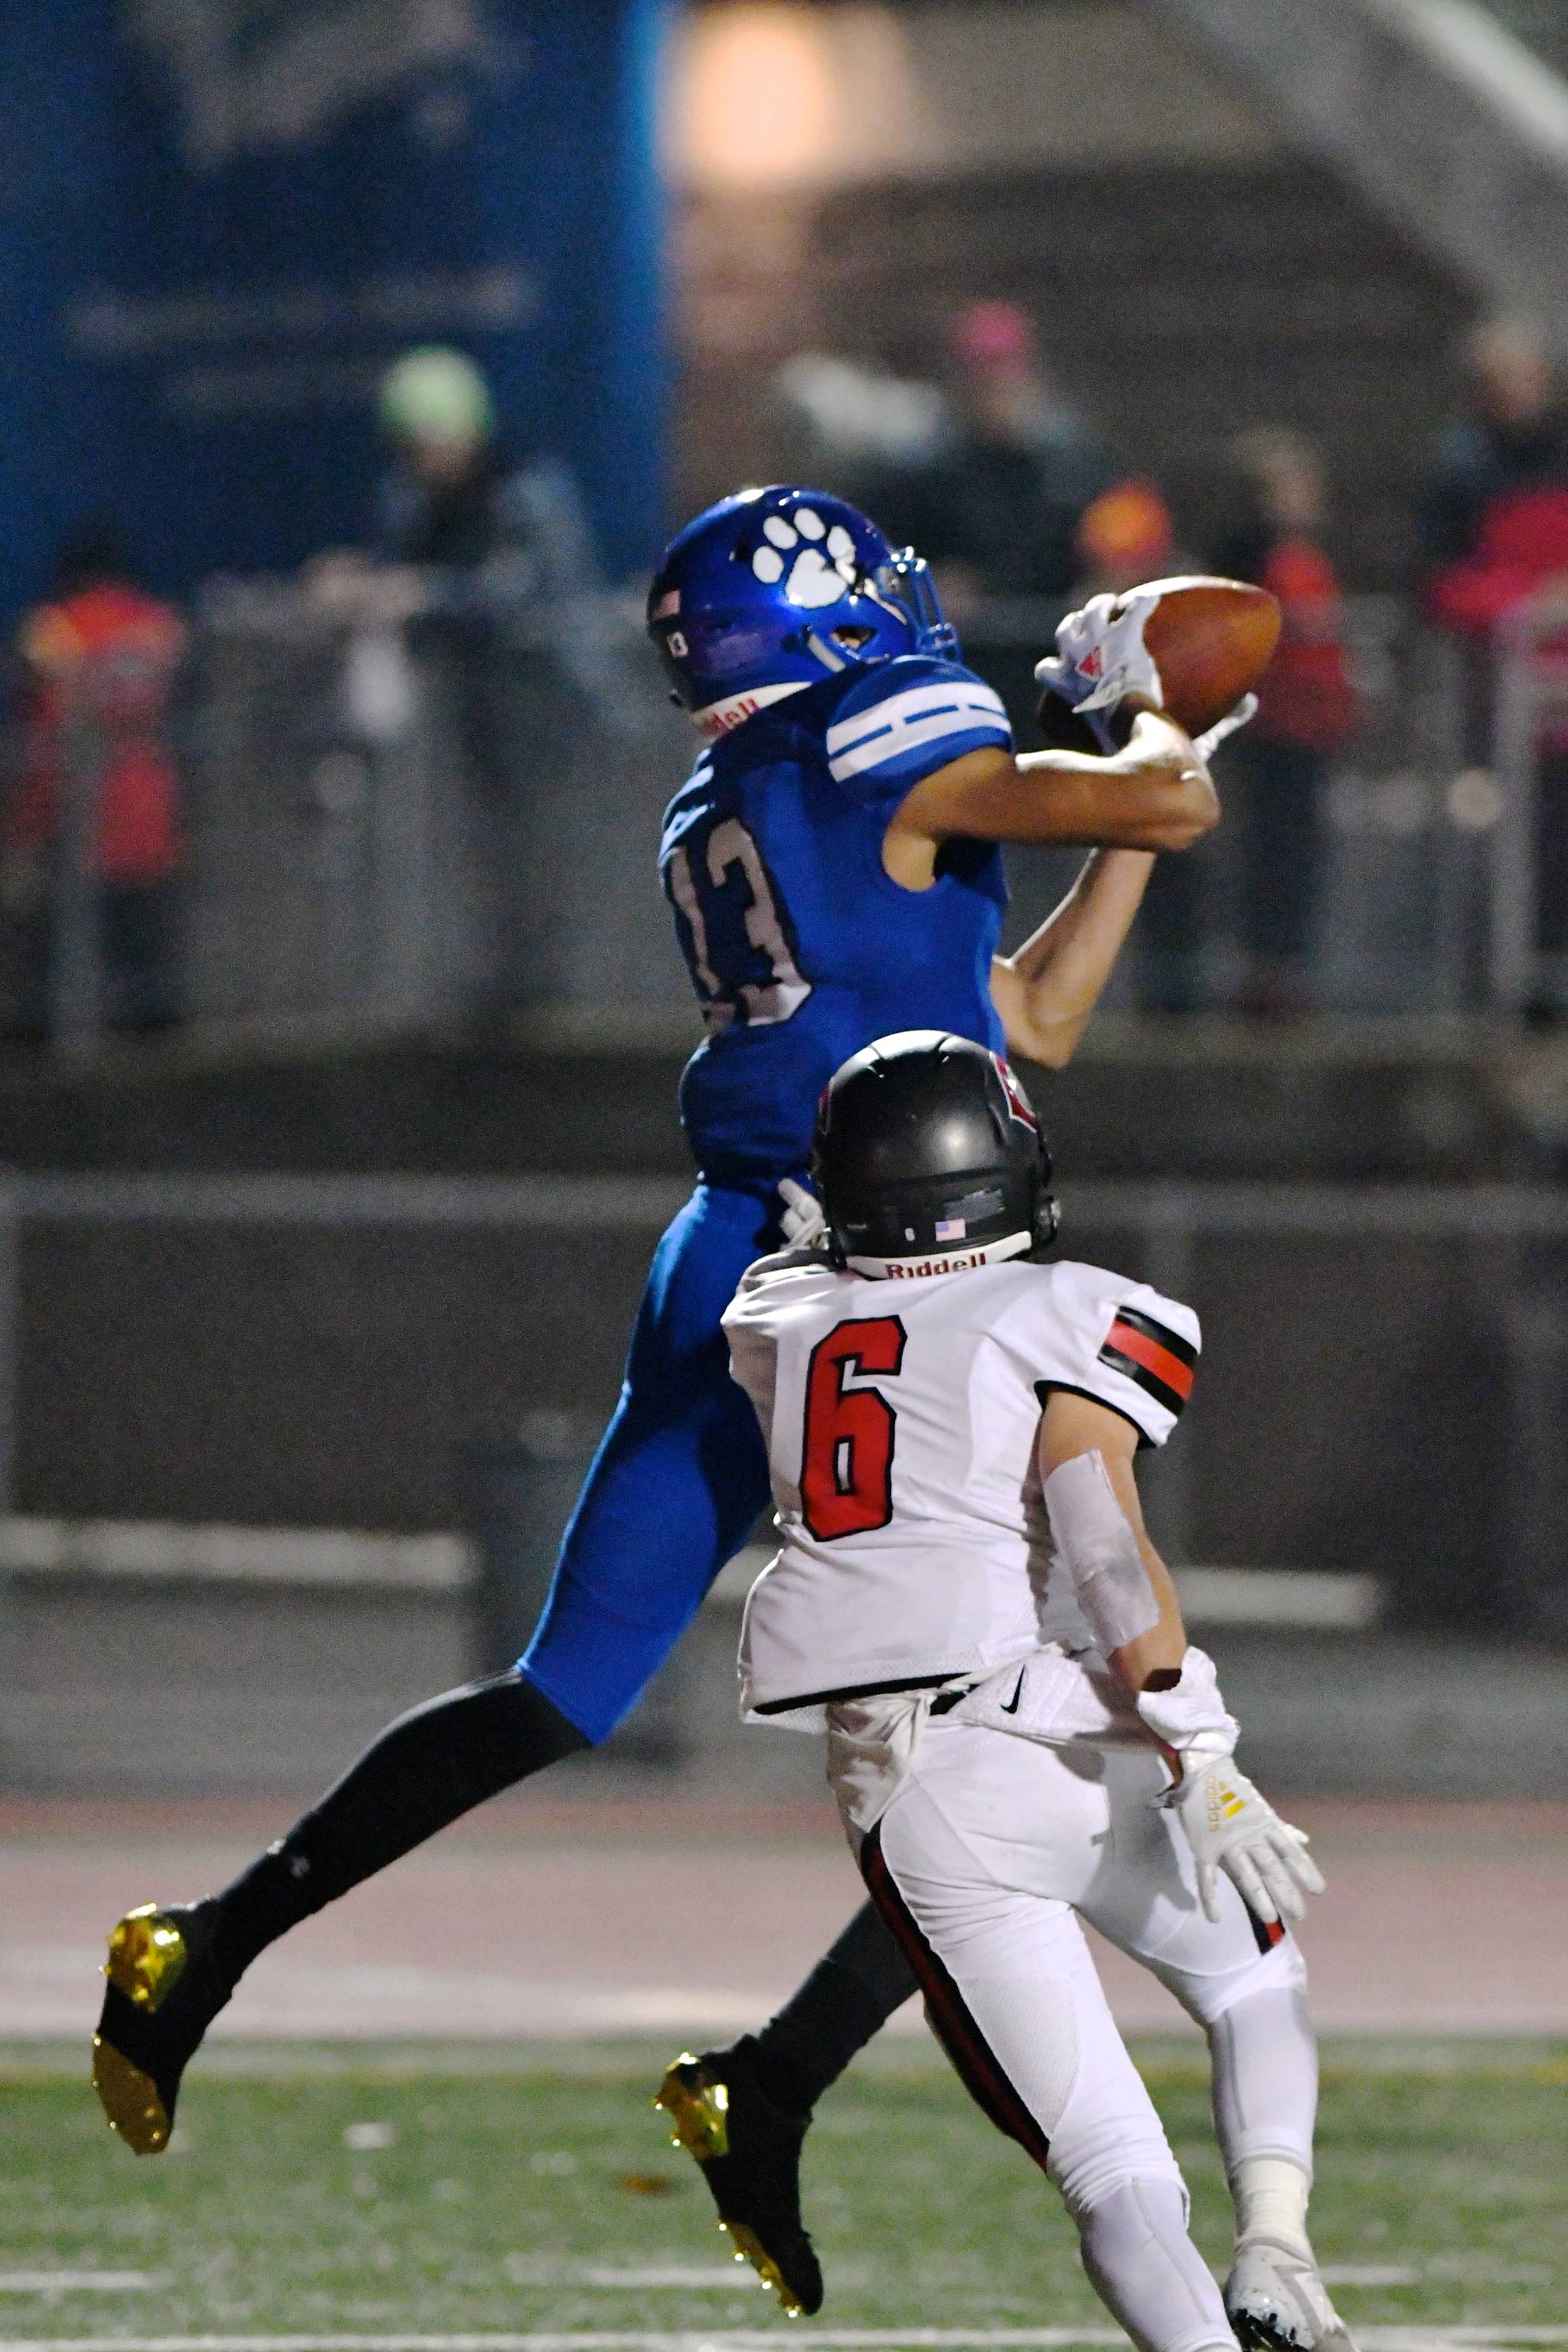 Jordyn Turner grabs a pass as Camas’ Dante Humble defends. Photo courtesy of Greg Nelson